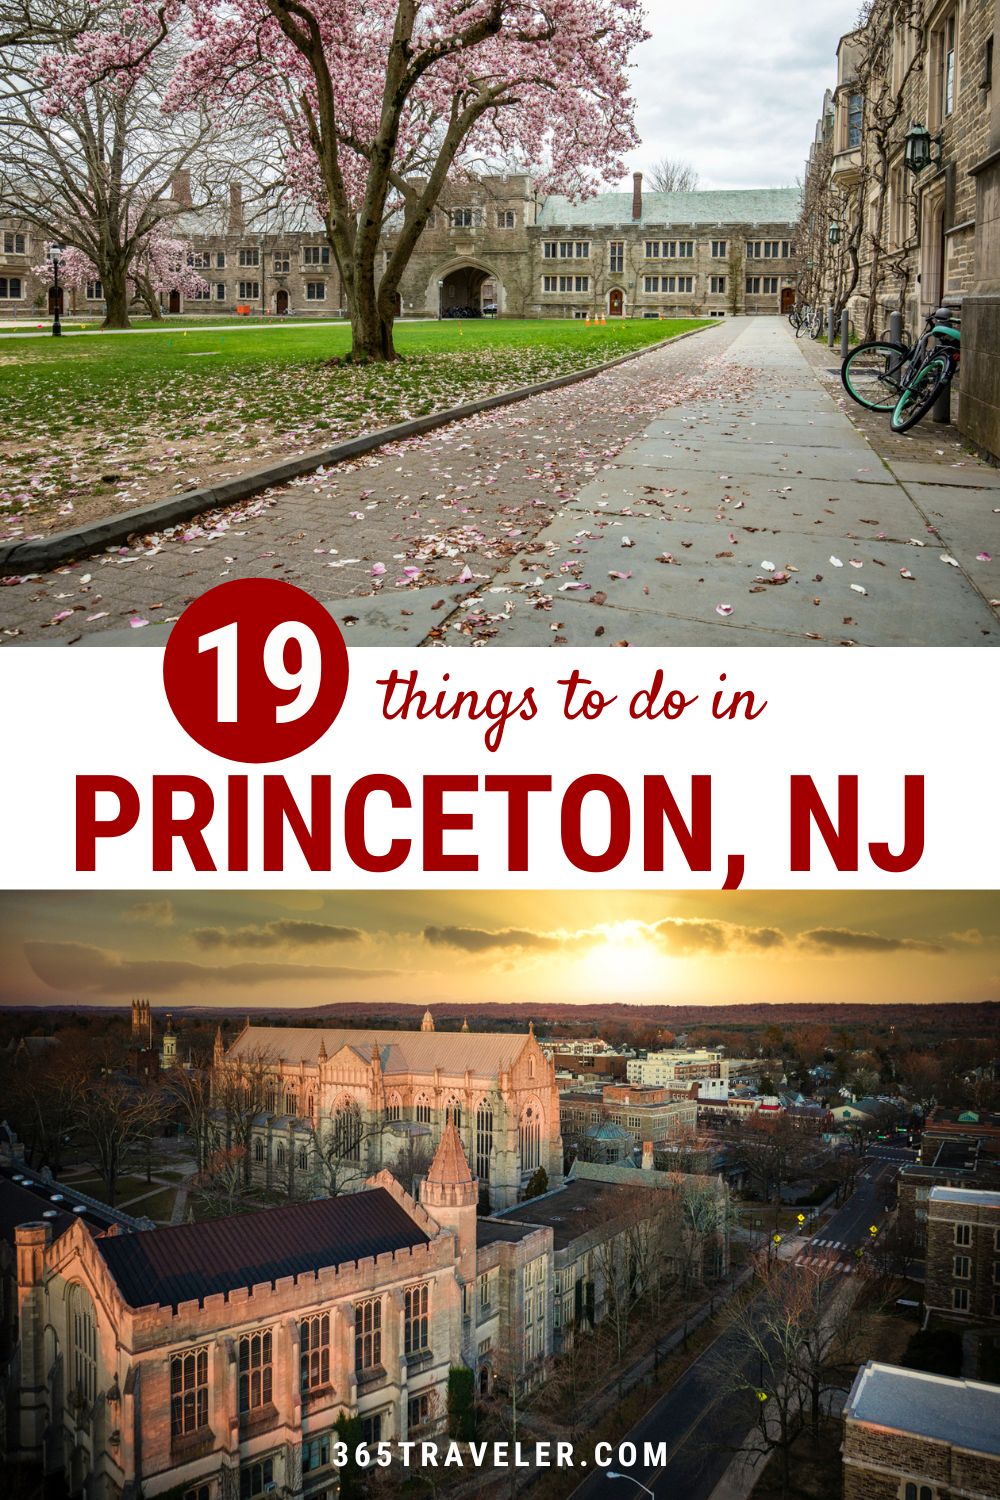 19 THINGS TO DO IN PRINCETON NJ YOU CAN'T MISS